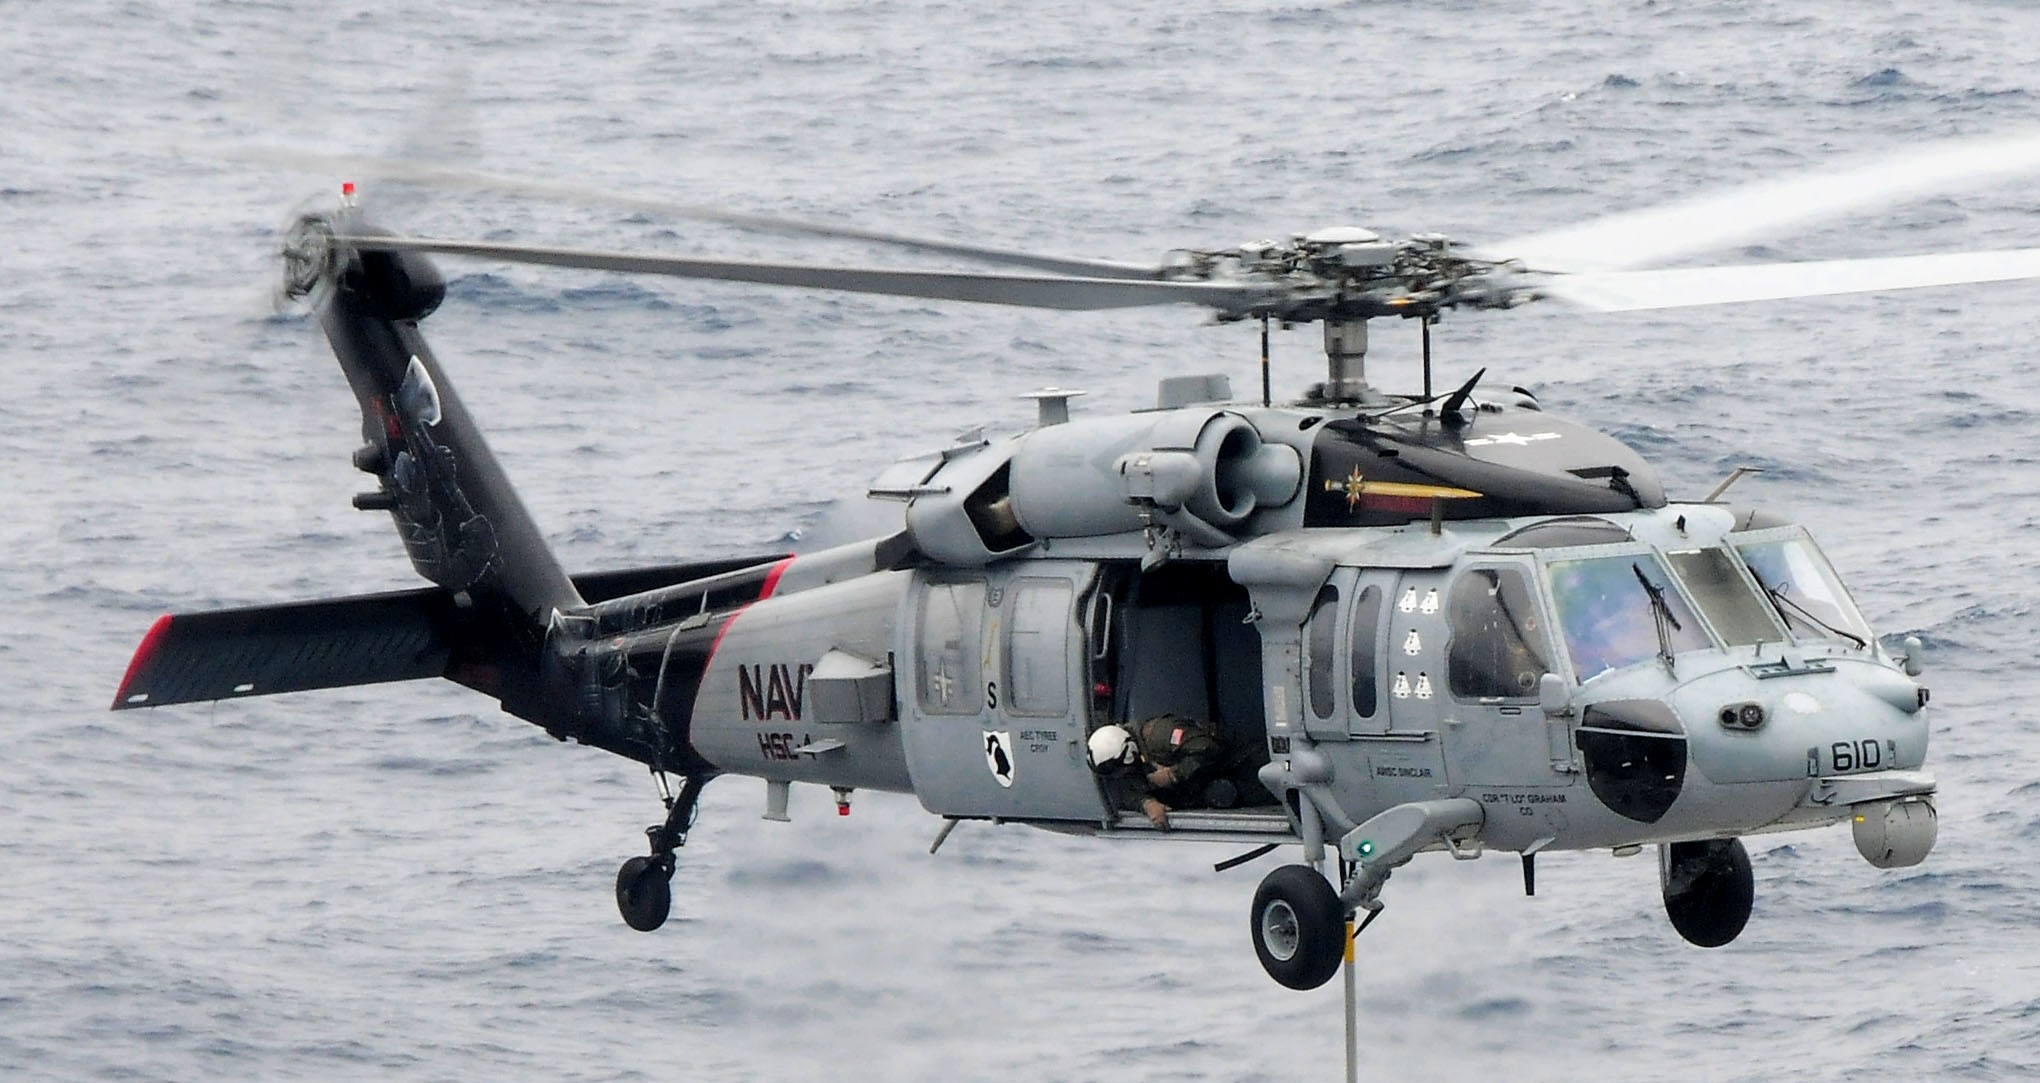 hsc-4 black knights helicopter sea combat squadron us navy mh-60s seahawk 2013 08